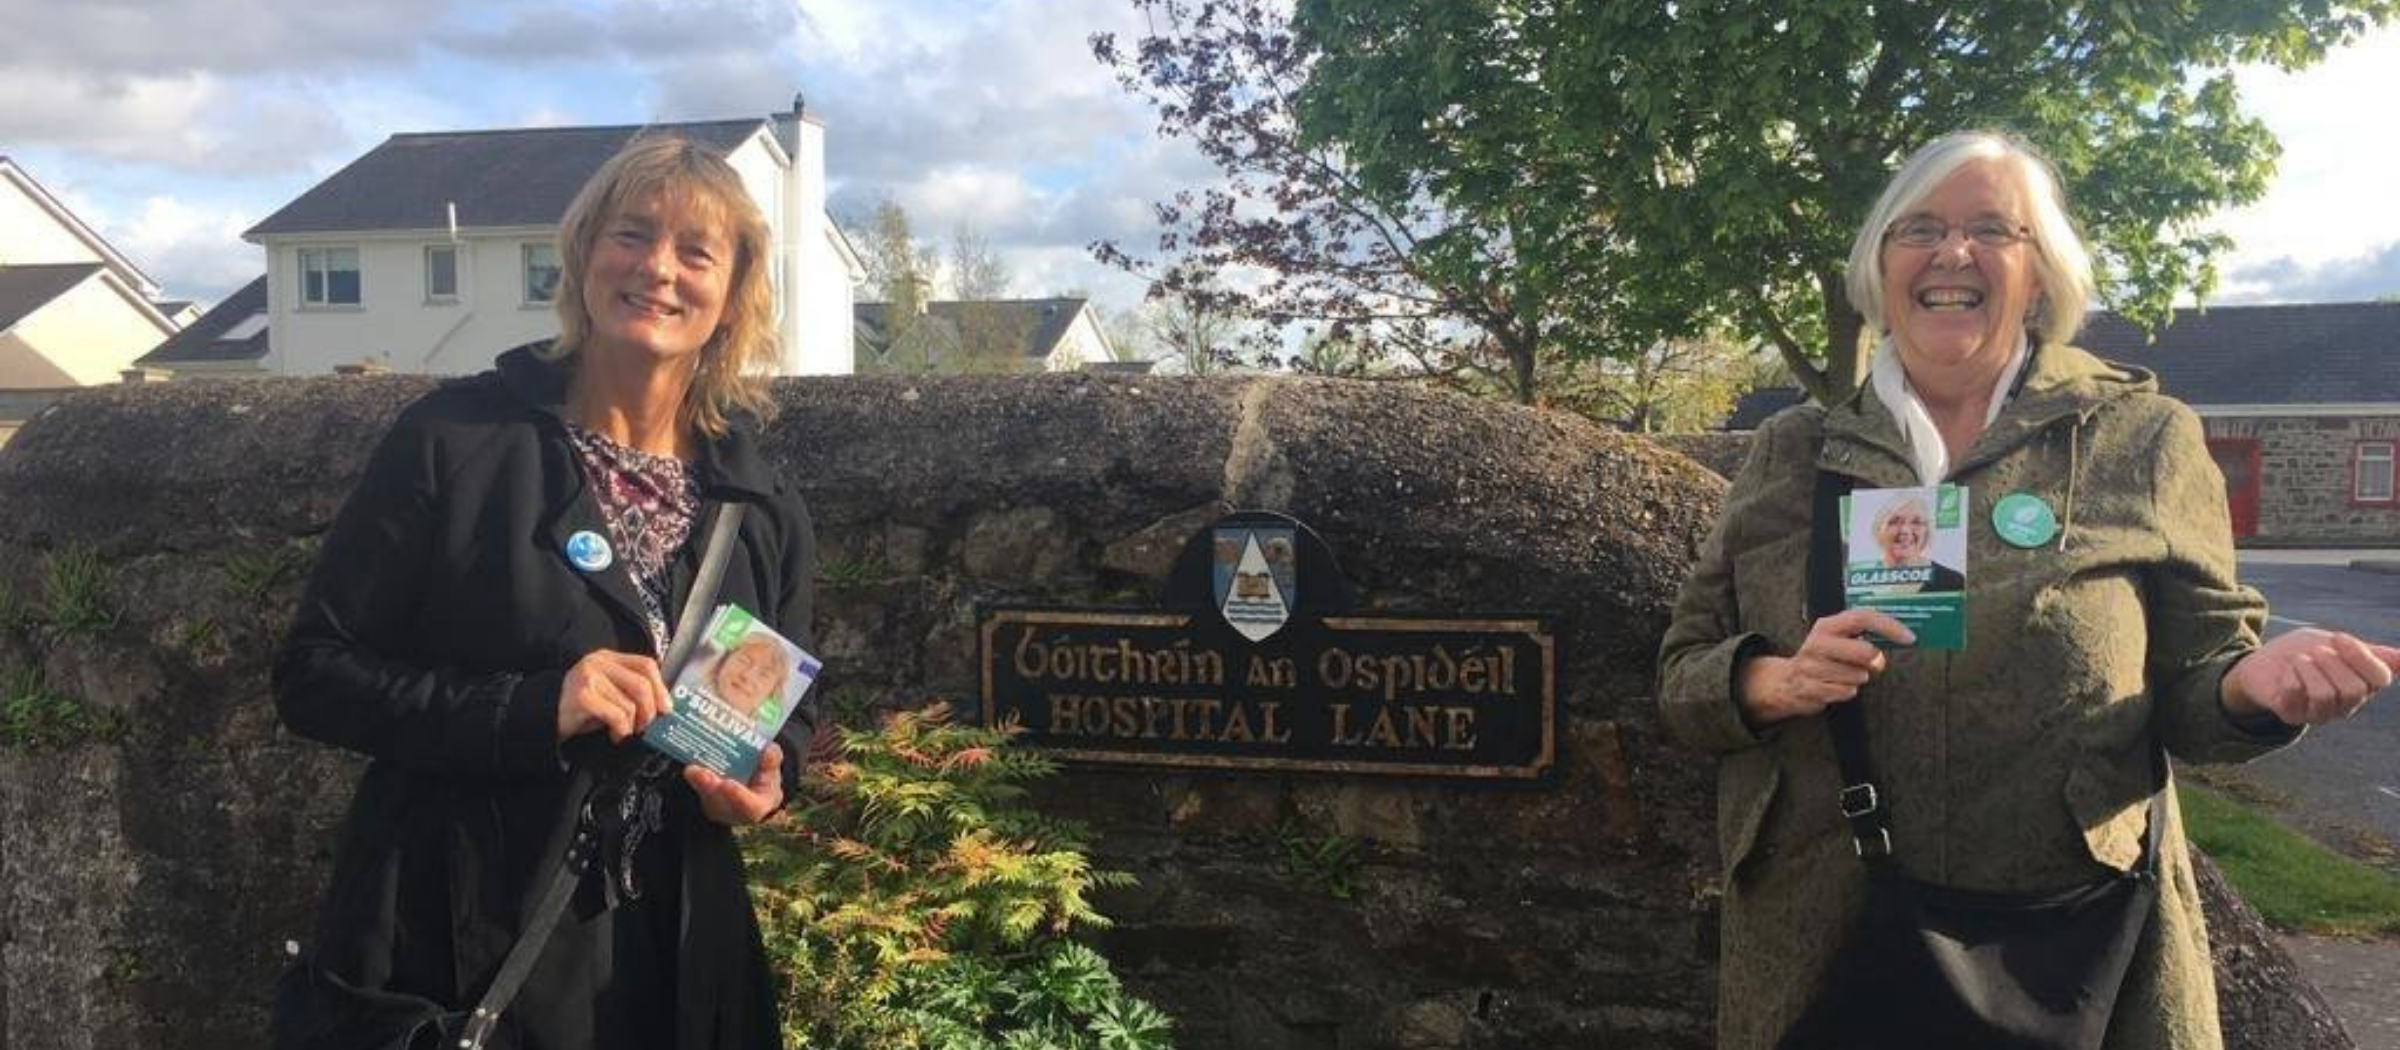 Lynne Glasscoe canvassing with Grace O'Sullivan in the 2019 Lecal Elections